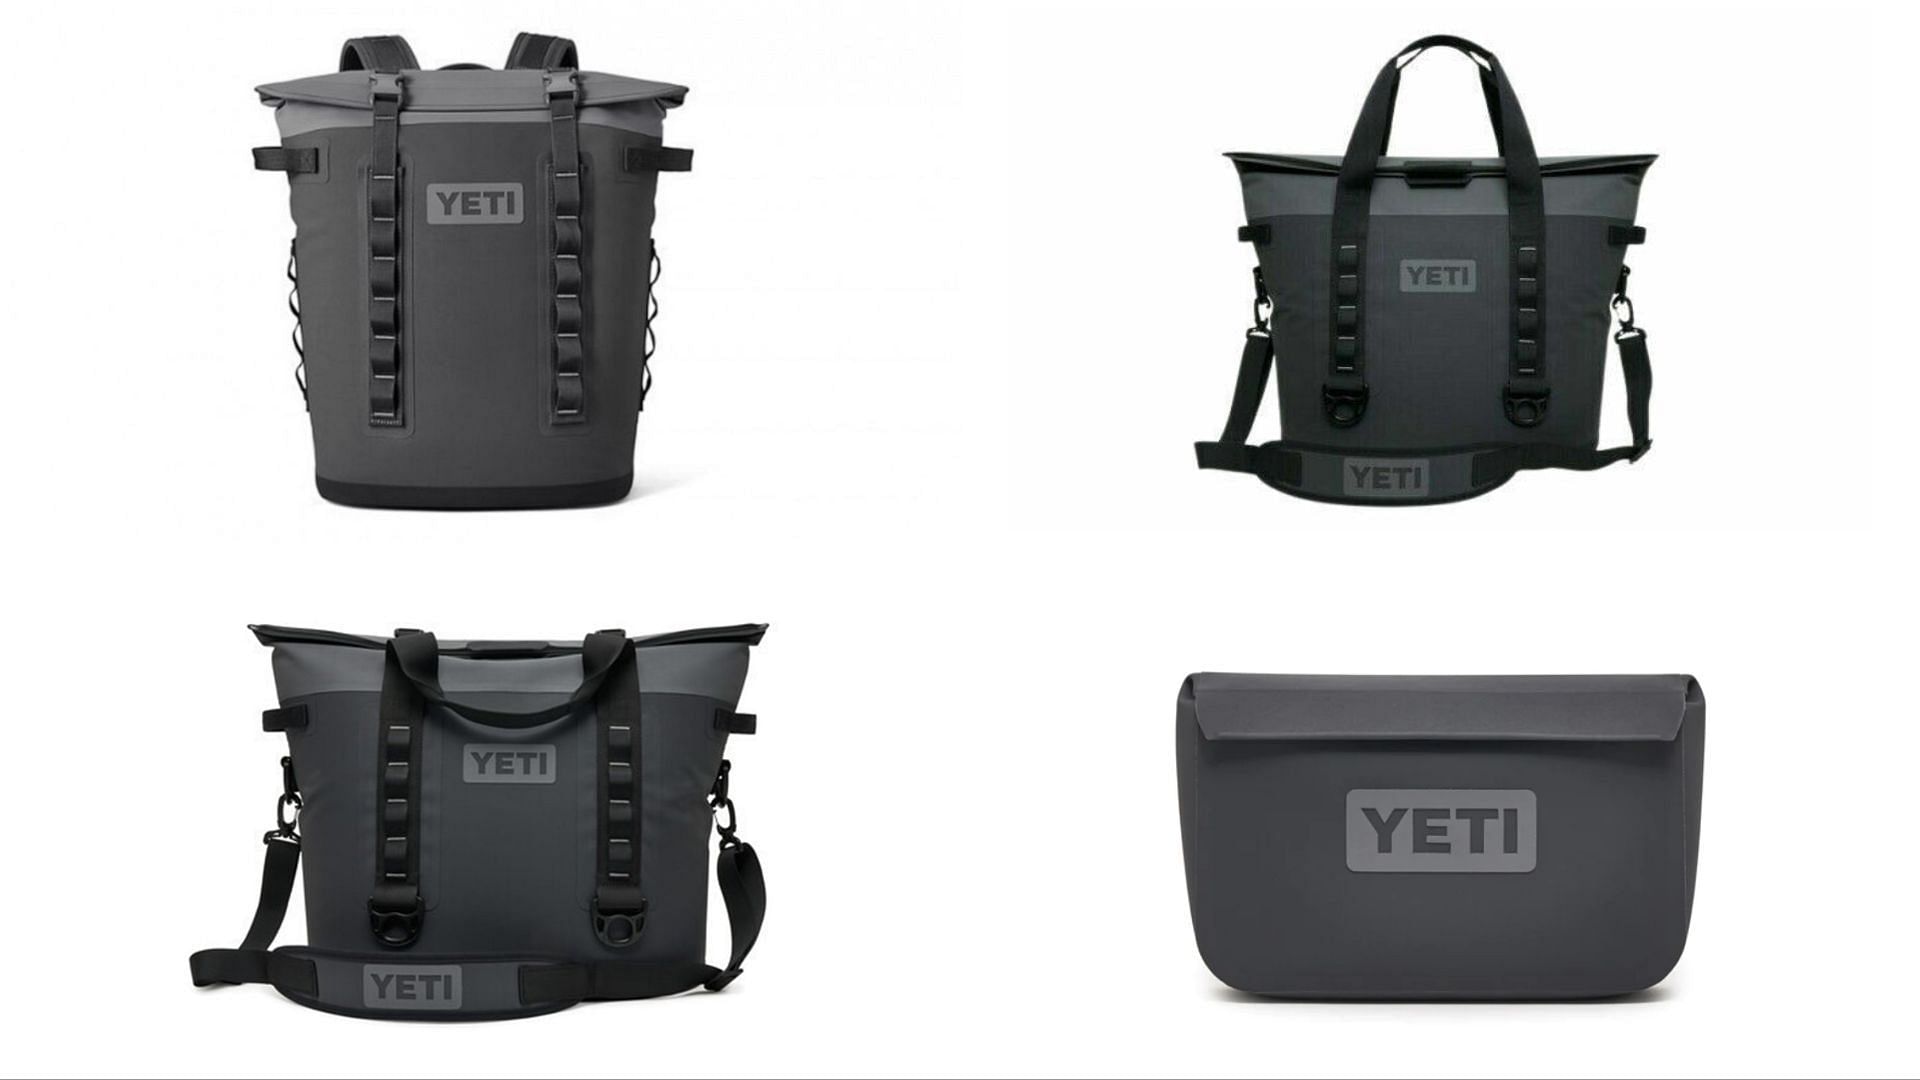 Yeti recall: 1.9 million soft coolers, gear cases recalled over magnet